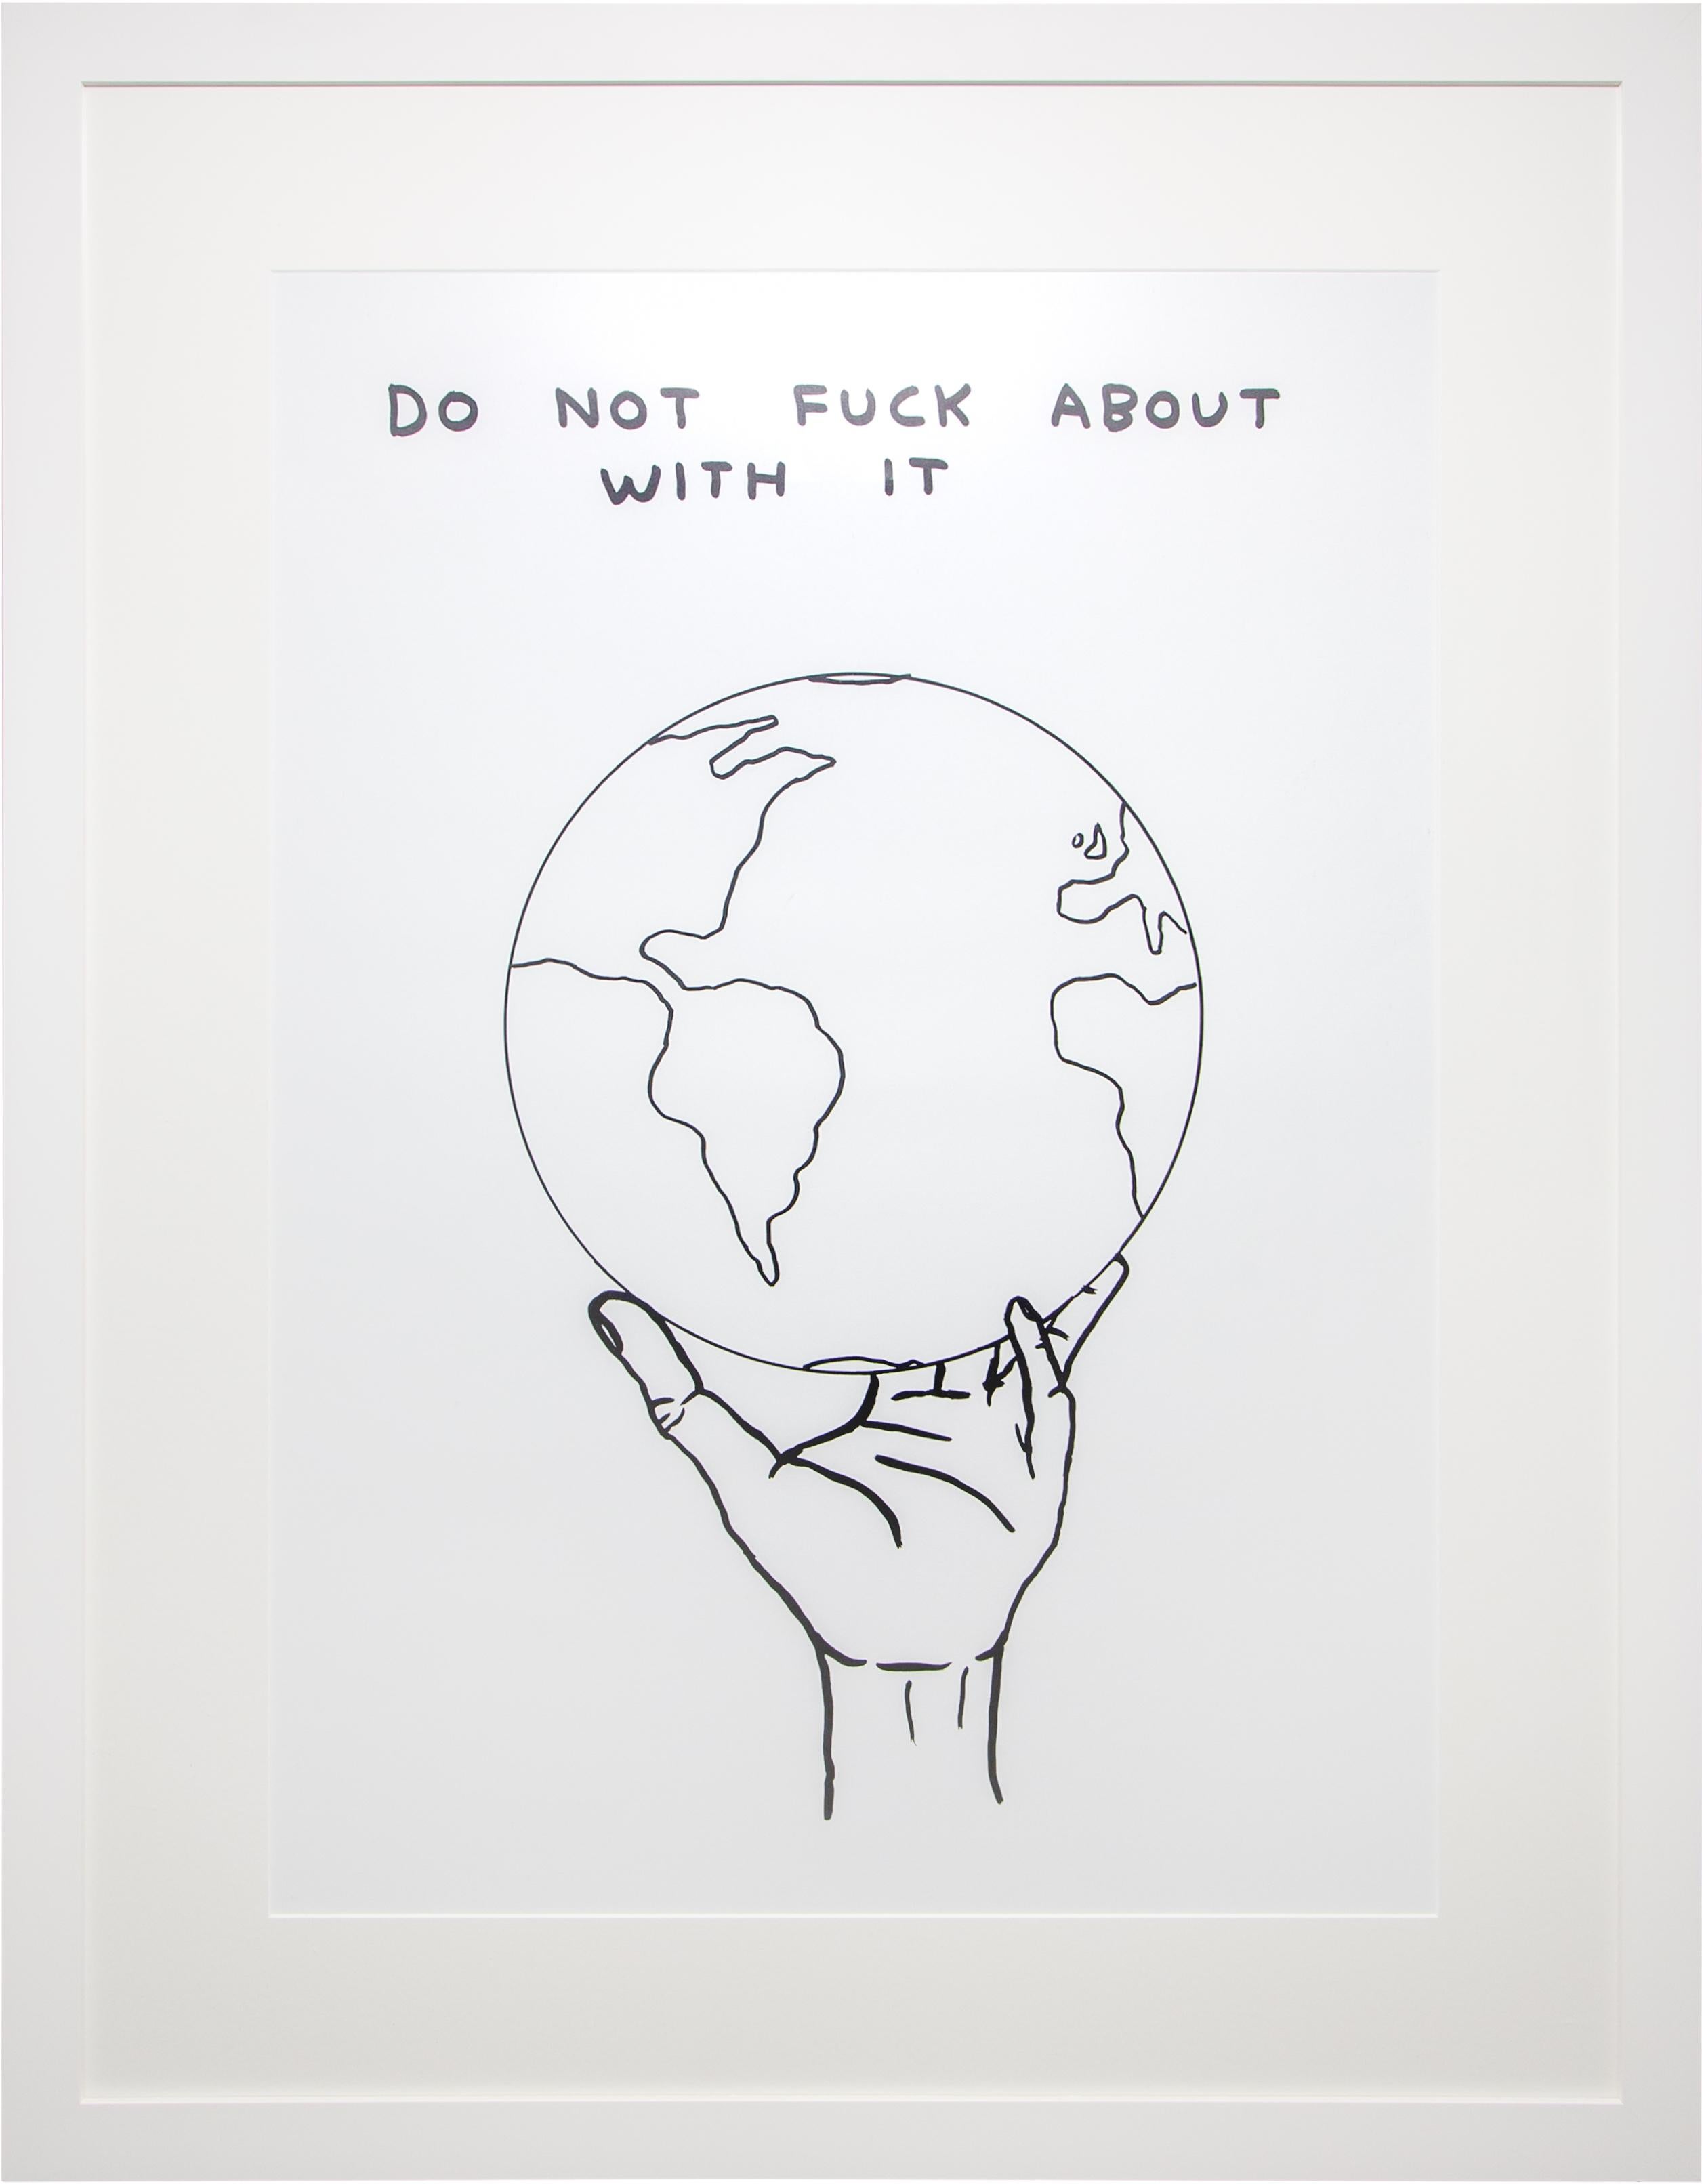 Do Not Fuck About With It - Print by David Shrigley